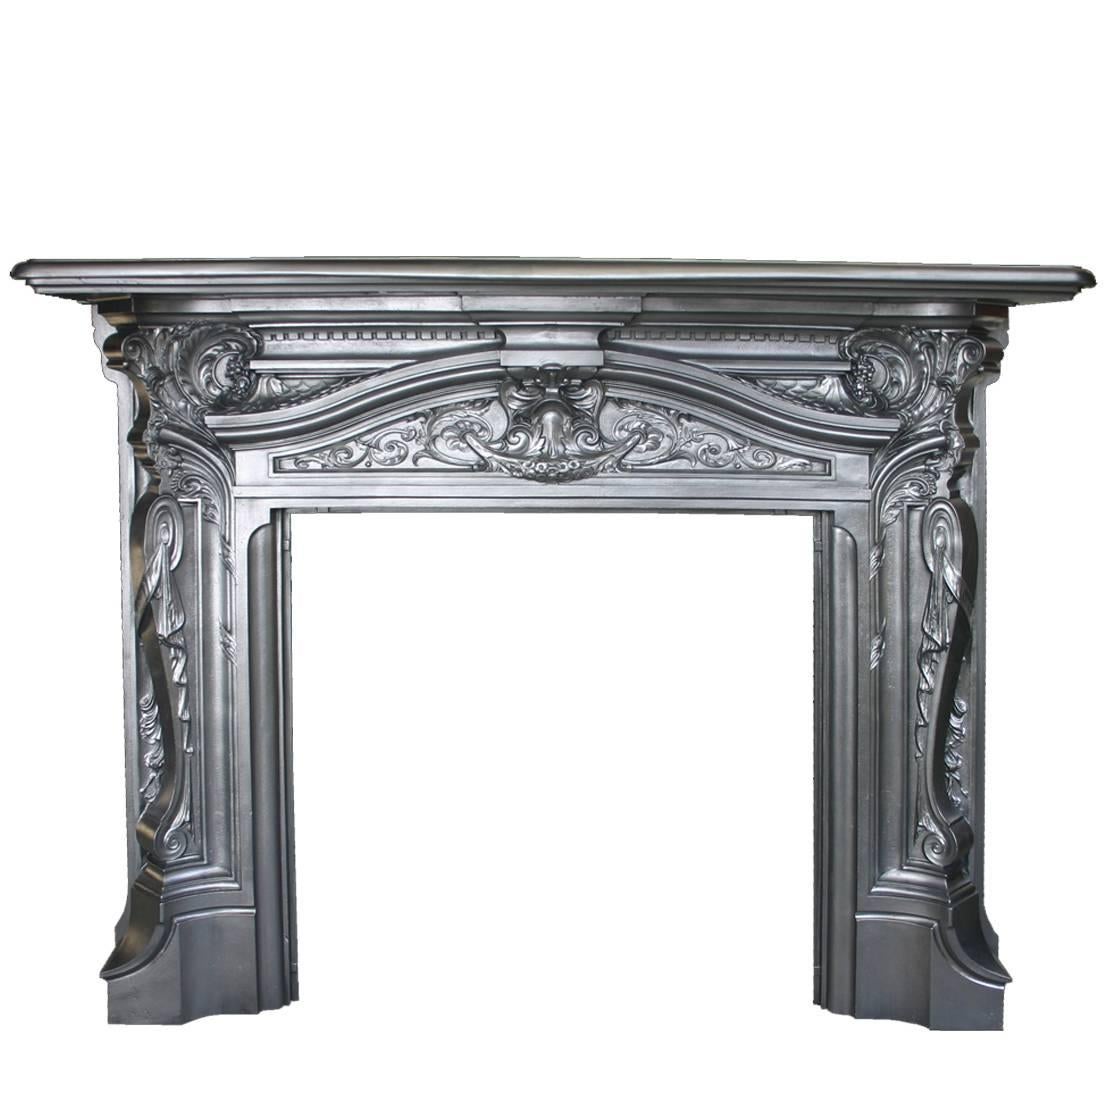 Spectacular Reclaimed Antique Late Victorian Cast Iron Rococo Chimneypiece